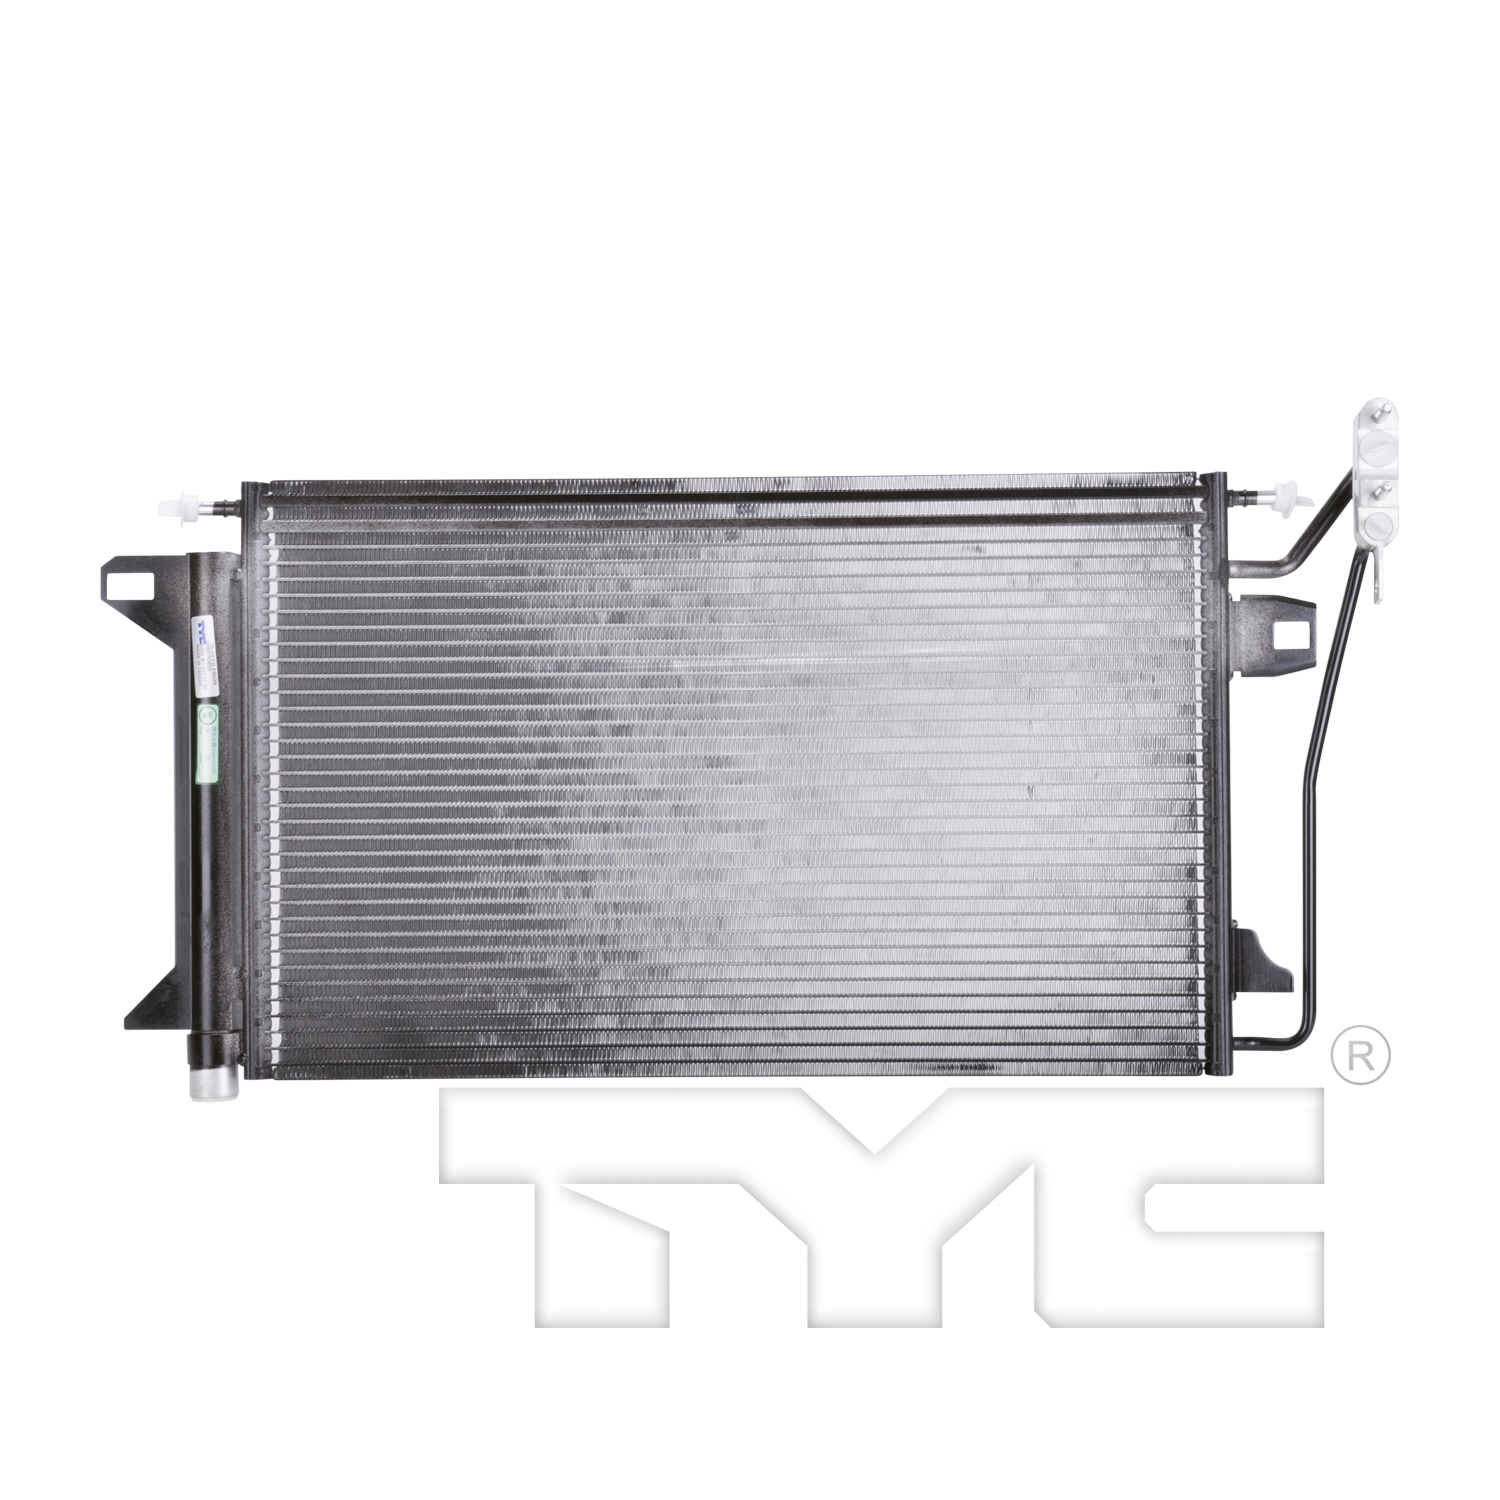 Aftermarket AC CONDENSERS for FORD - FUSION, FUSION,06-09,Air conditioning condenser